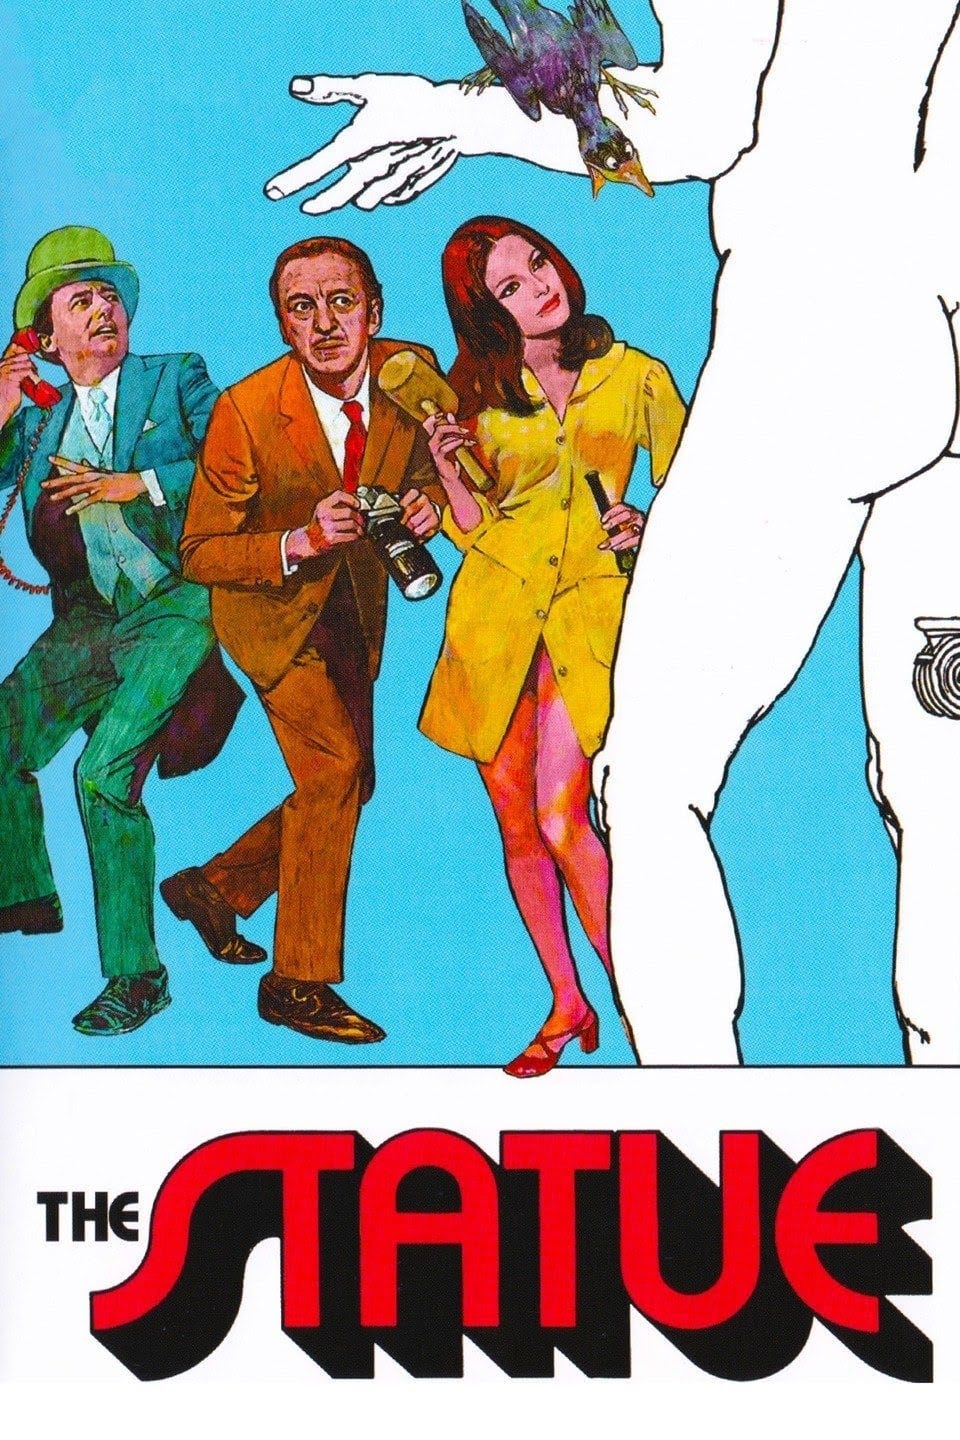 The Statue (1971) | Poster